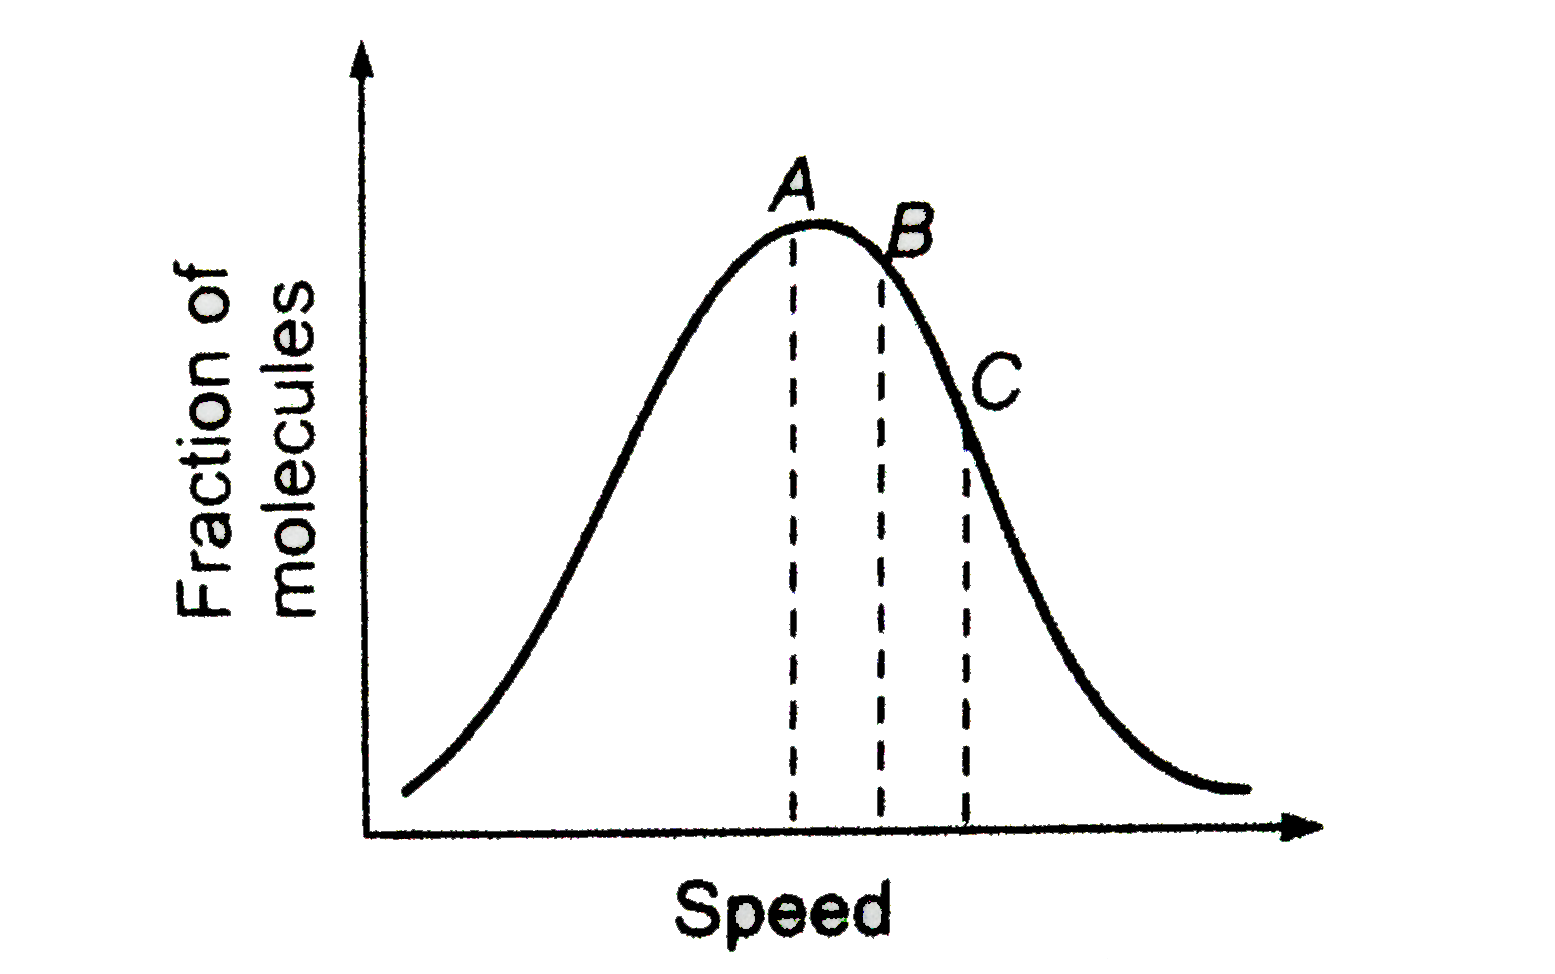 At a definit temperature (T), the distribution of speeds is given by the curve. In the curve points A, B and C indicates the speeds corresponding to :